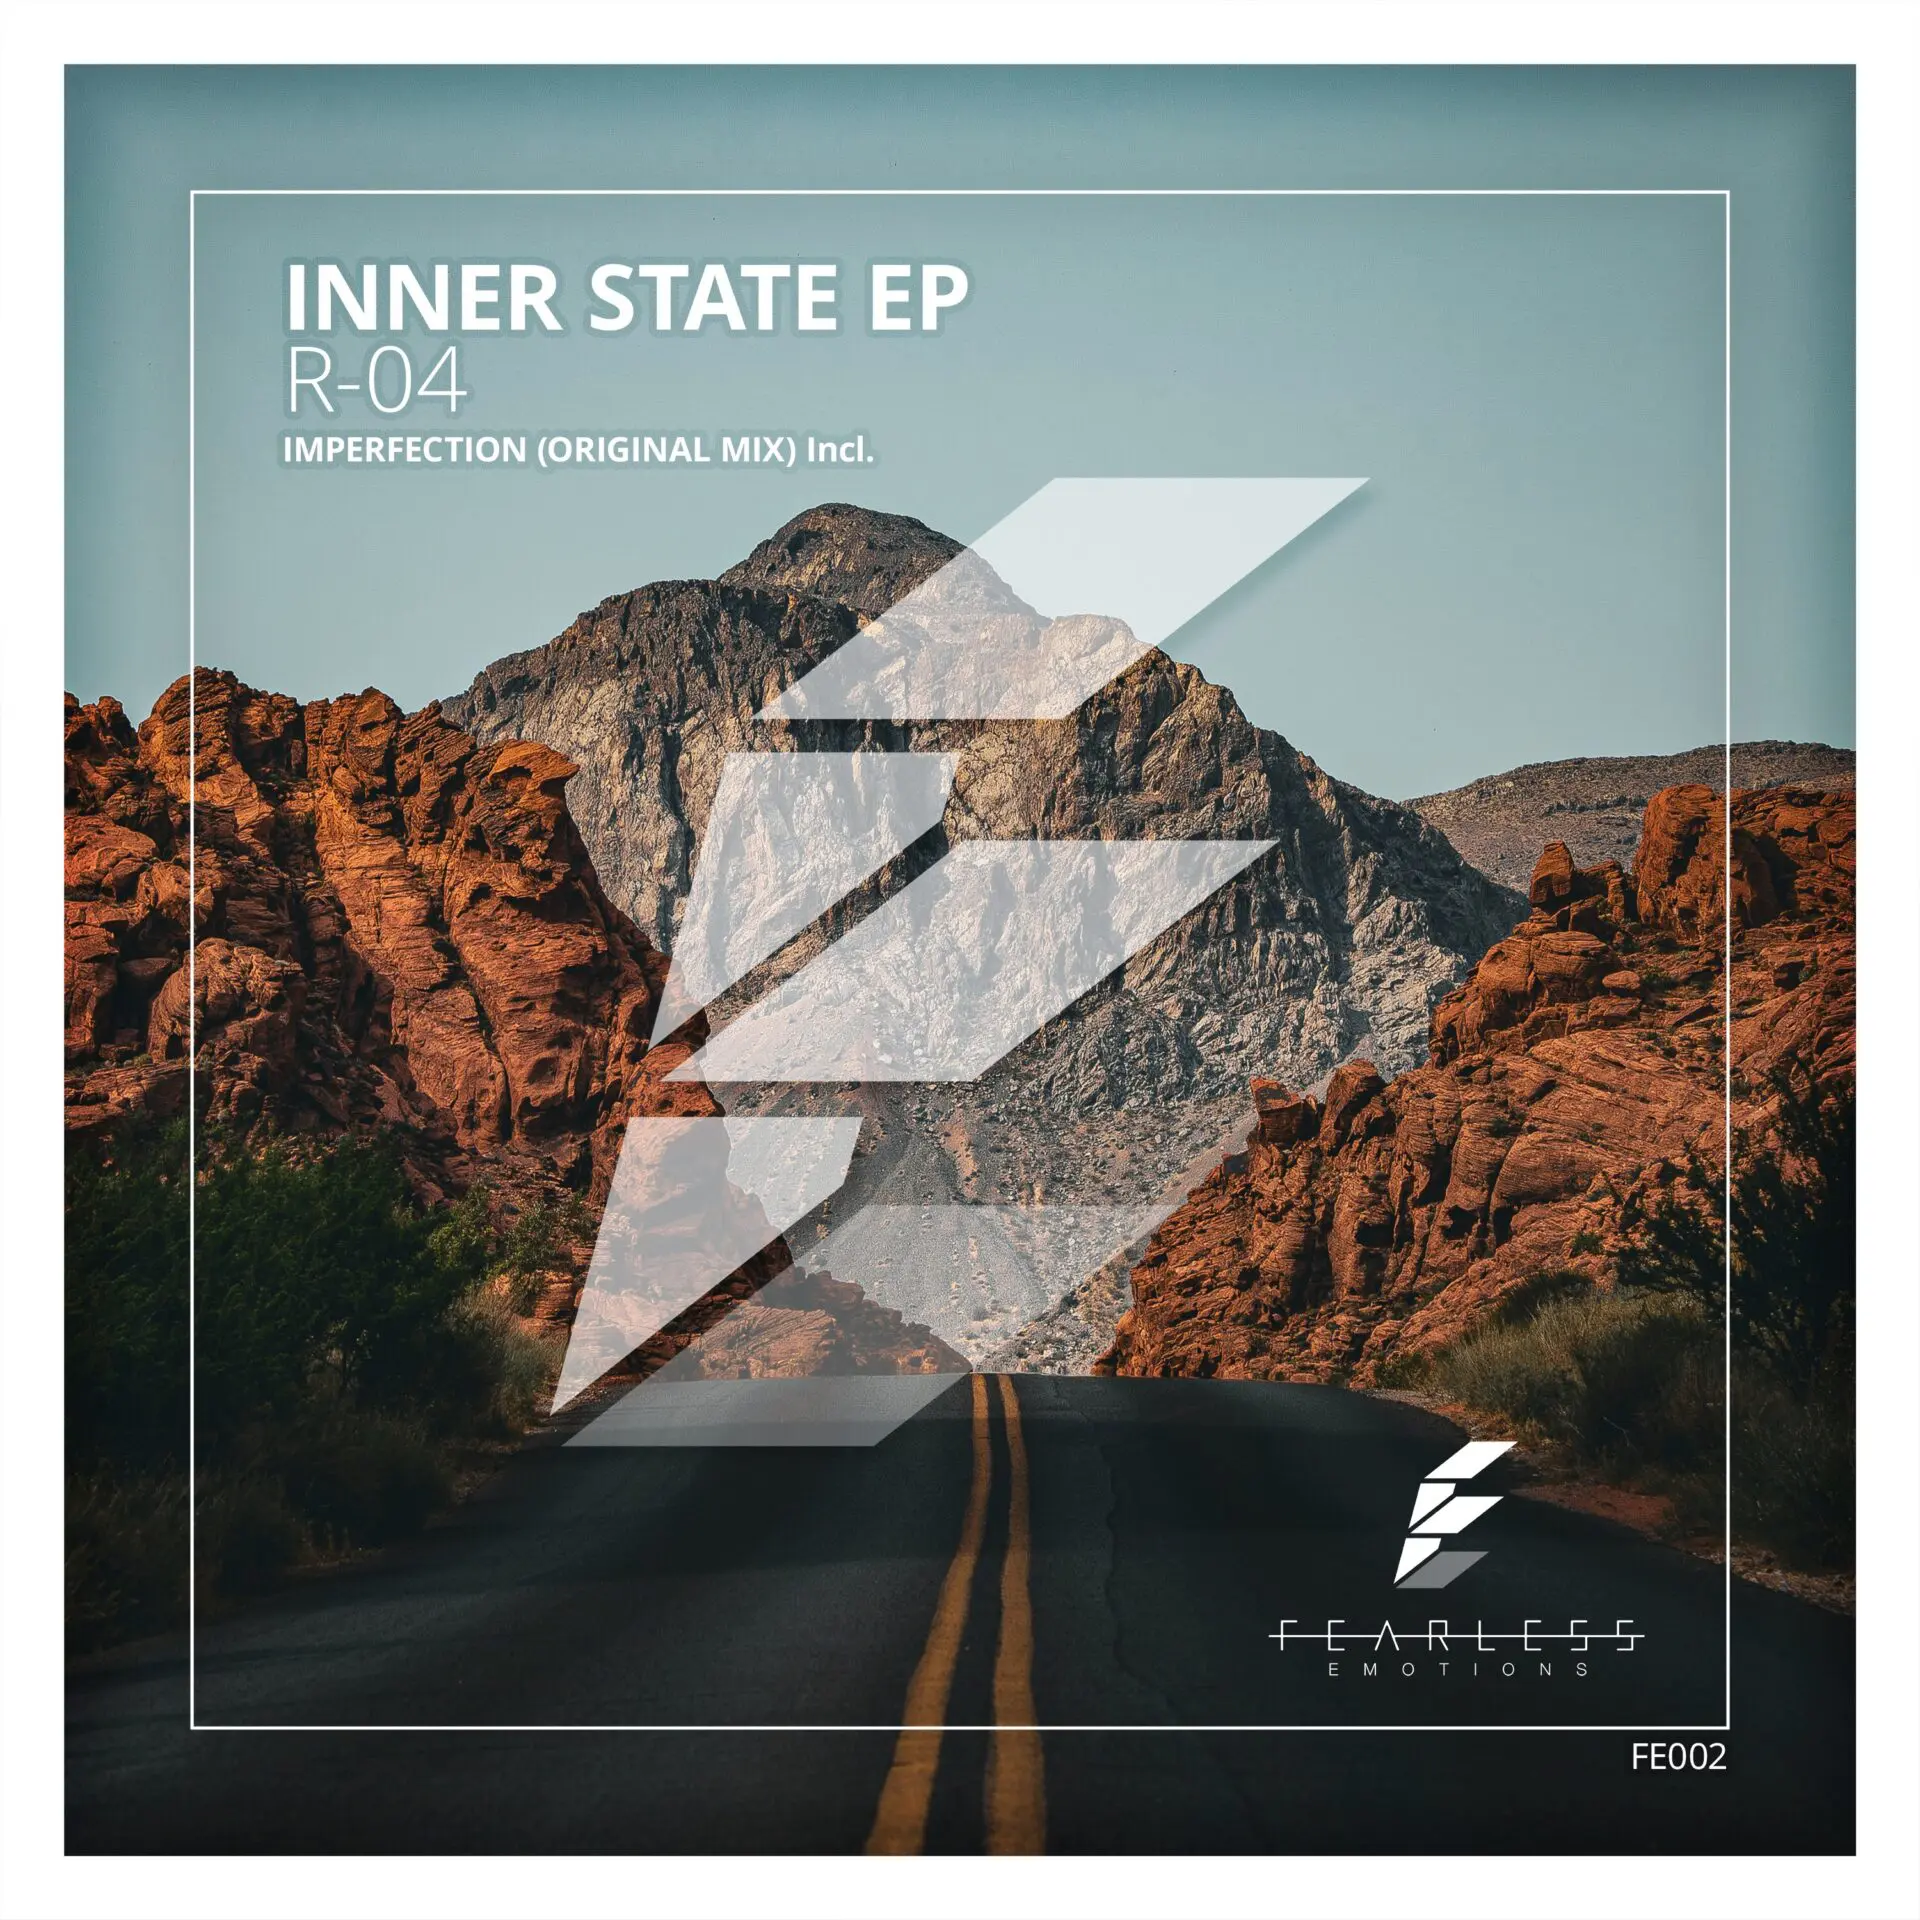 NEW RELEASE: R-04 “INNER STATE EP” [Fearless Emotions]